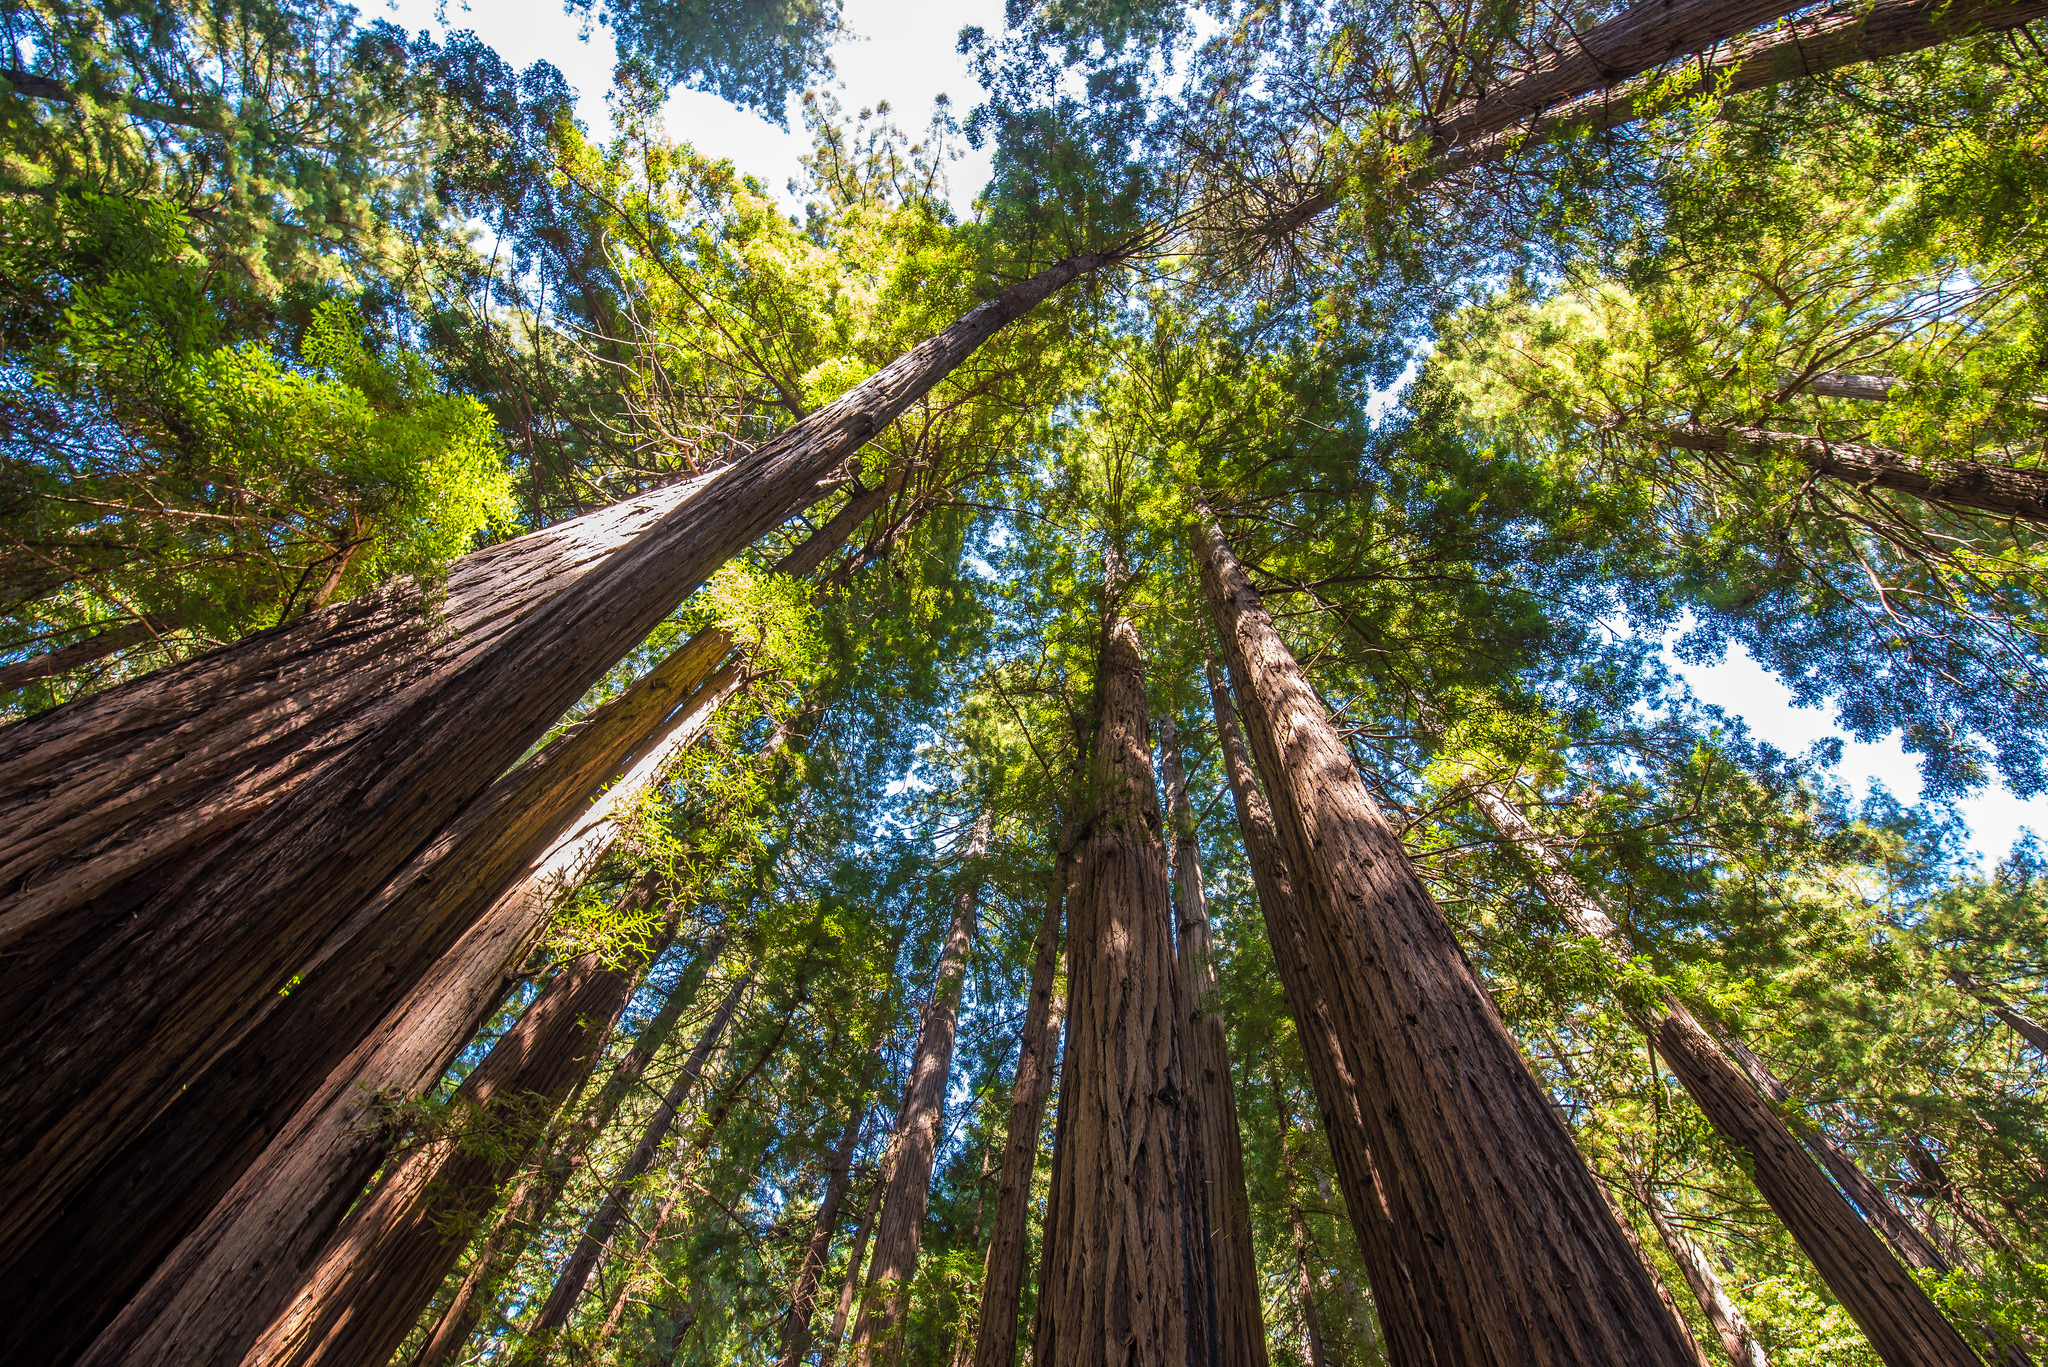 Guided Muir Woods Tour